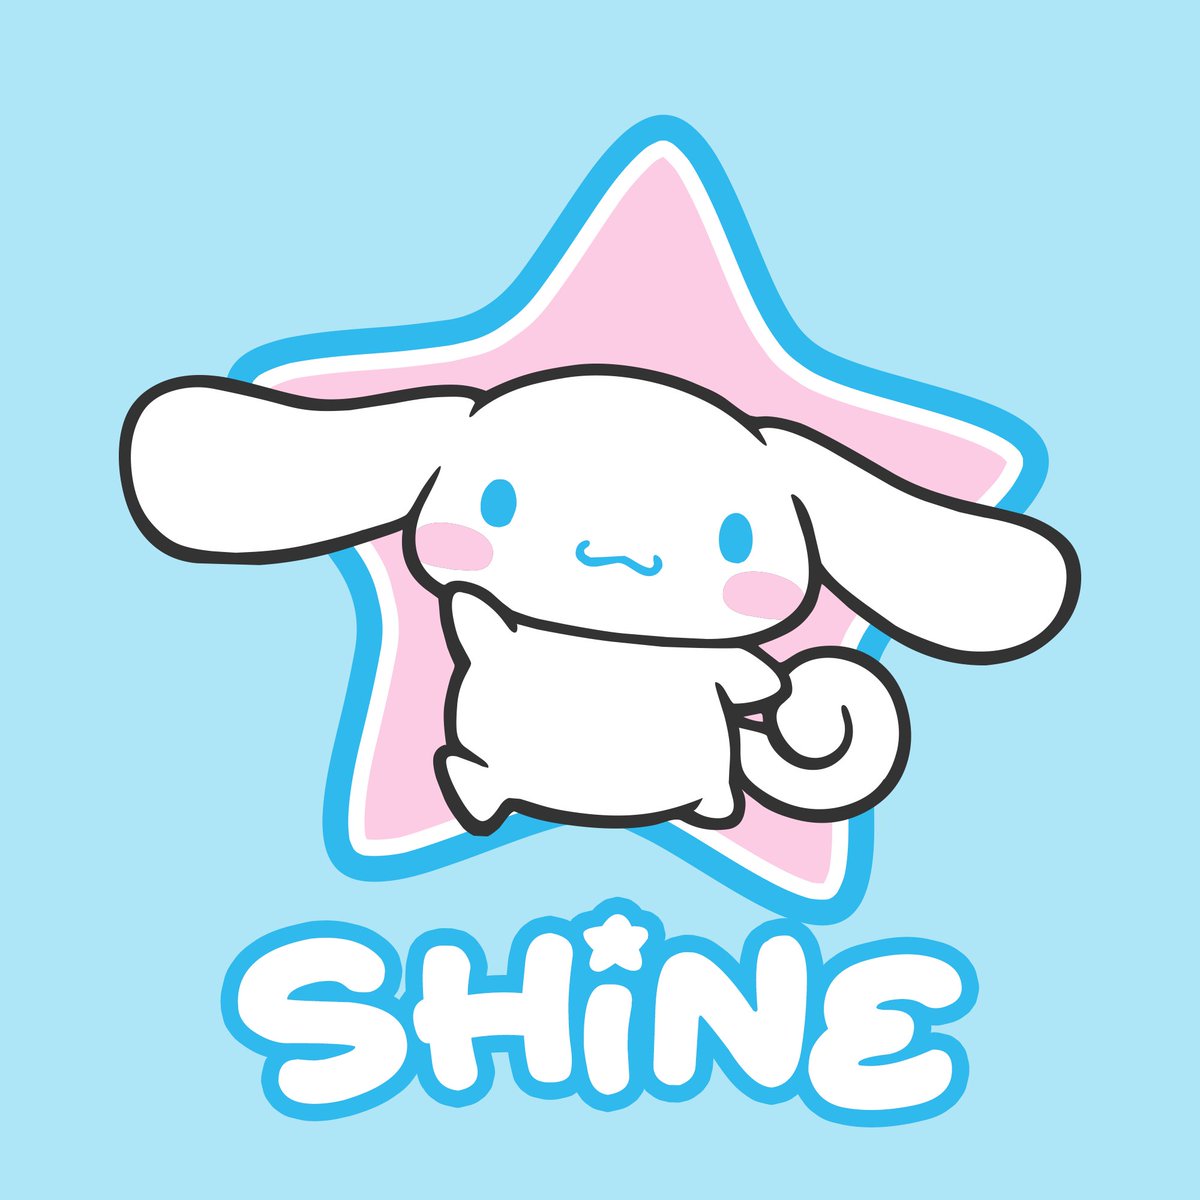 I am excited to announce SHINE, an ITG invitational that I will be hosting in the Chicago suburbs on Aug 24-25! Details will be announced in the coming weeks! Huge shoutouts to @Blizzrdball for the most adorable logo ever!